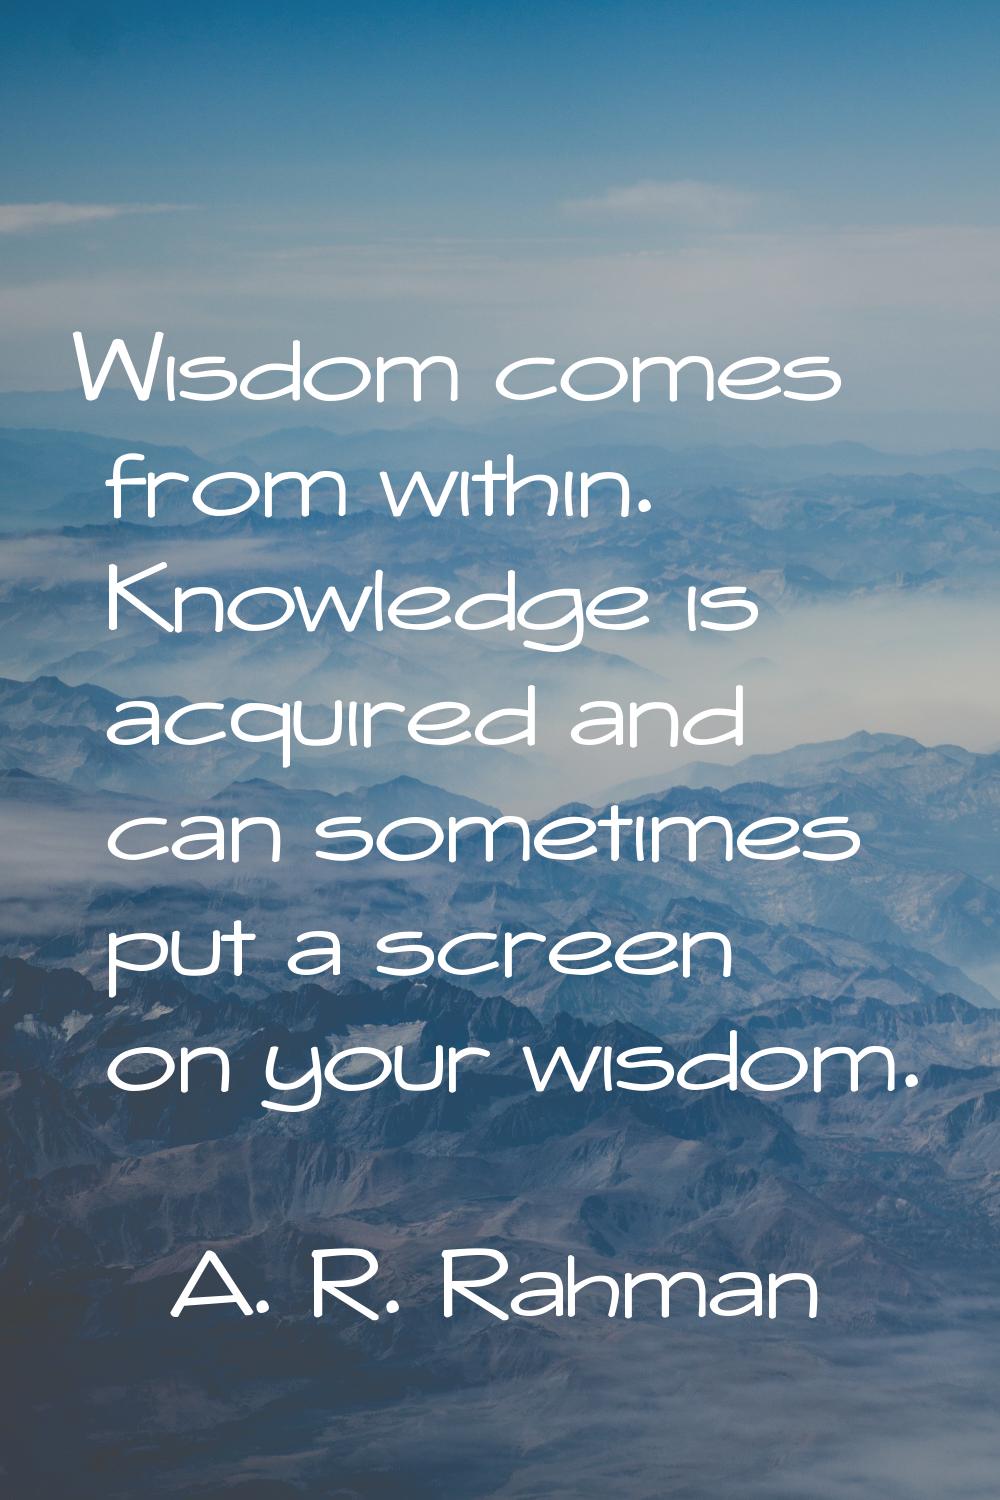 Wisdom comes from within. Knowledge is acquired and can sometimes put a screen on your wisdom.